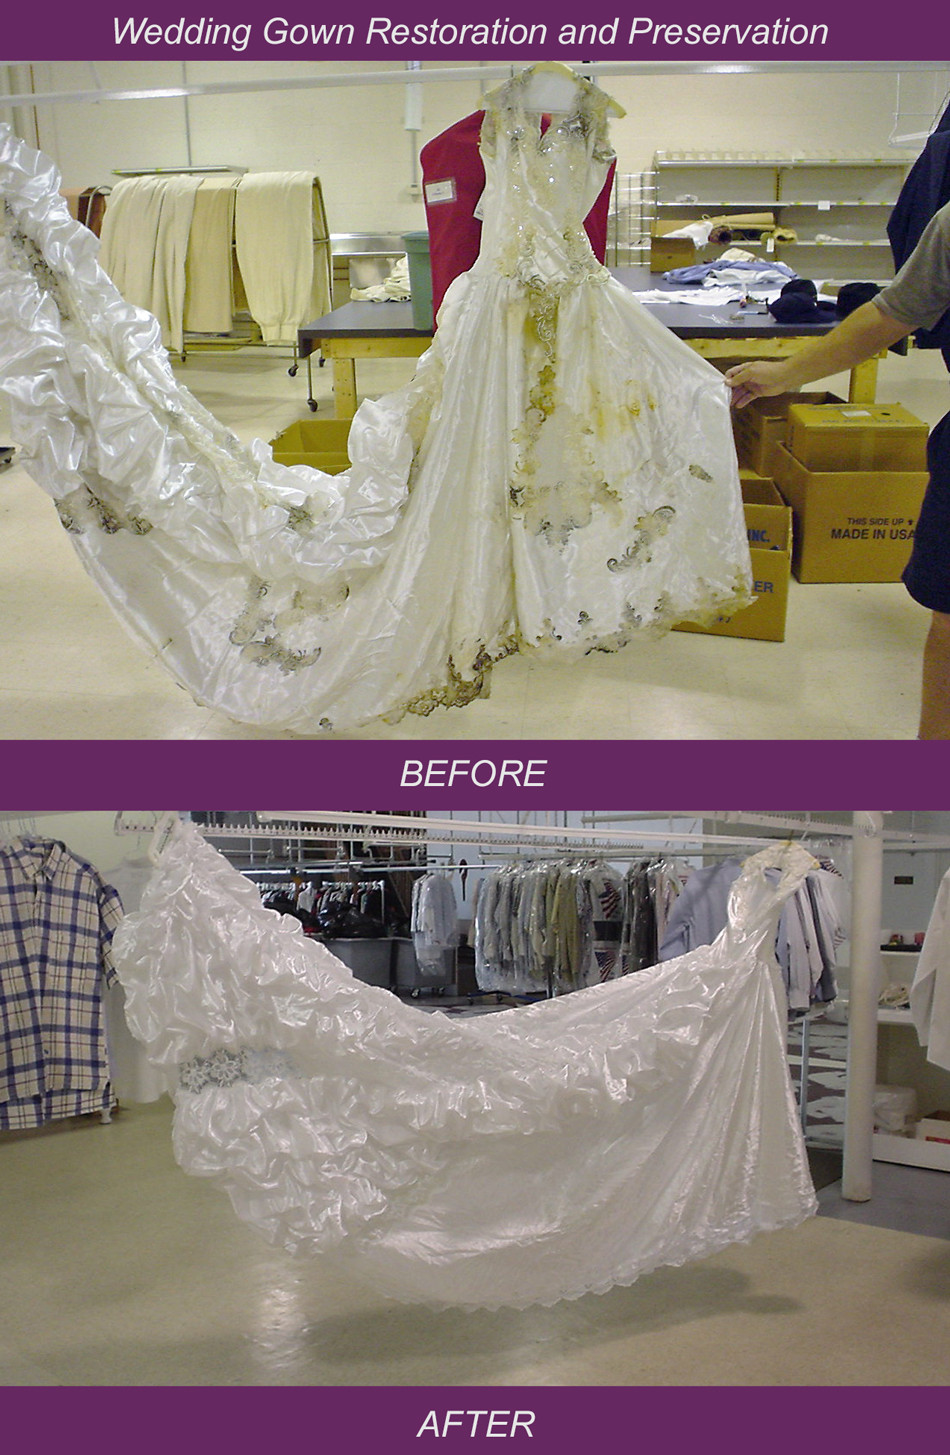 Wedding Gown Preservation Company
 Wedding Gown Preservation and Restoration